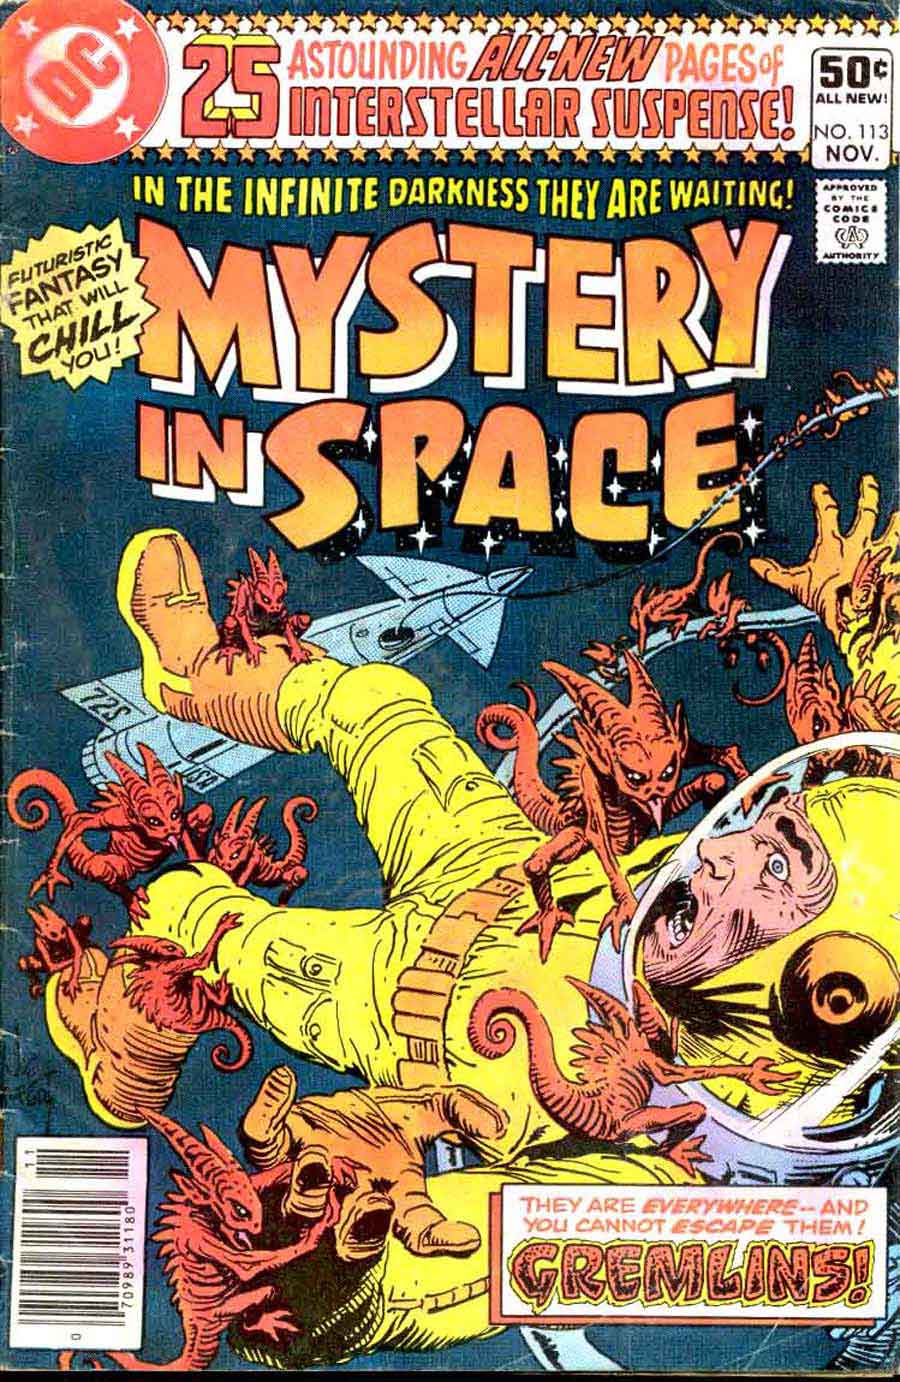 Joe Kubert dc science fiction dc 1980s comic book cover - Mystery in Space #113